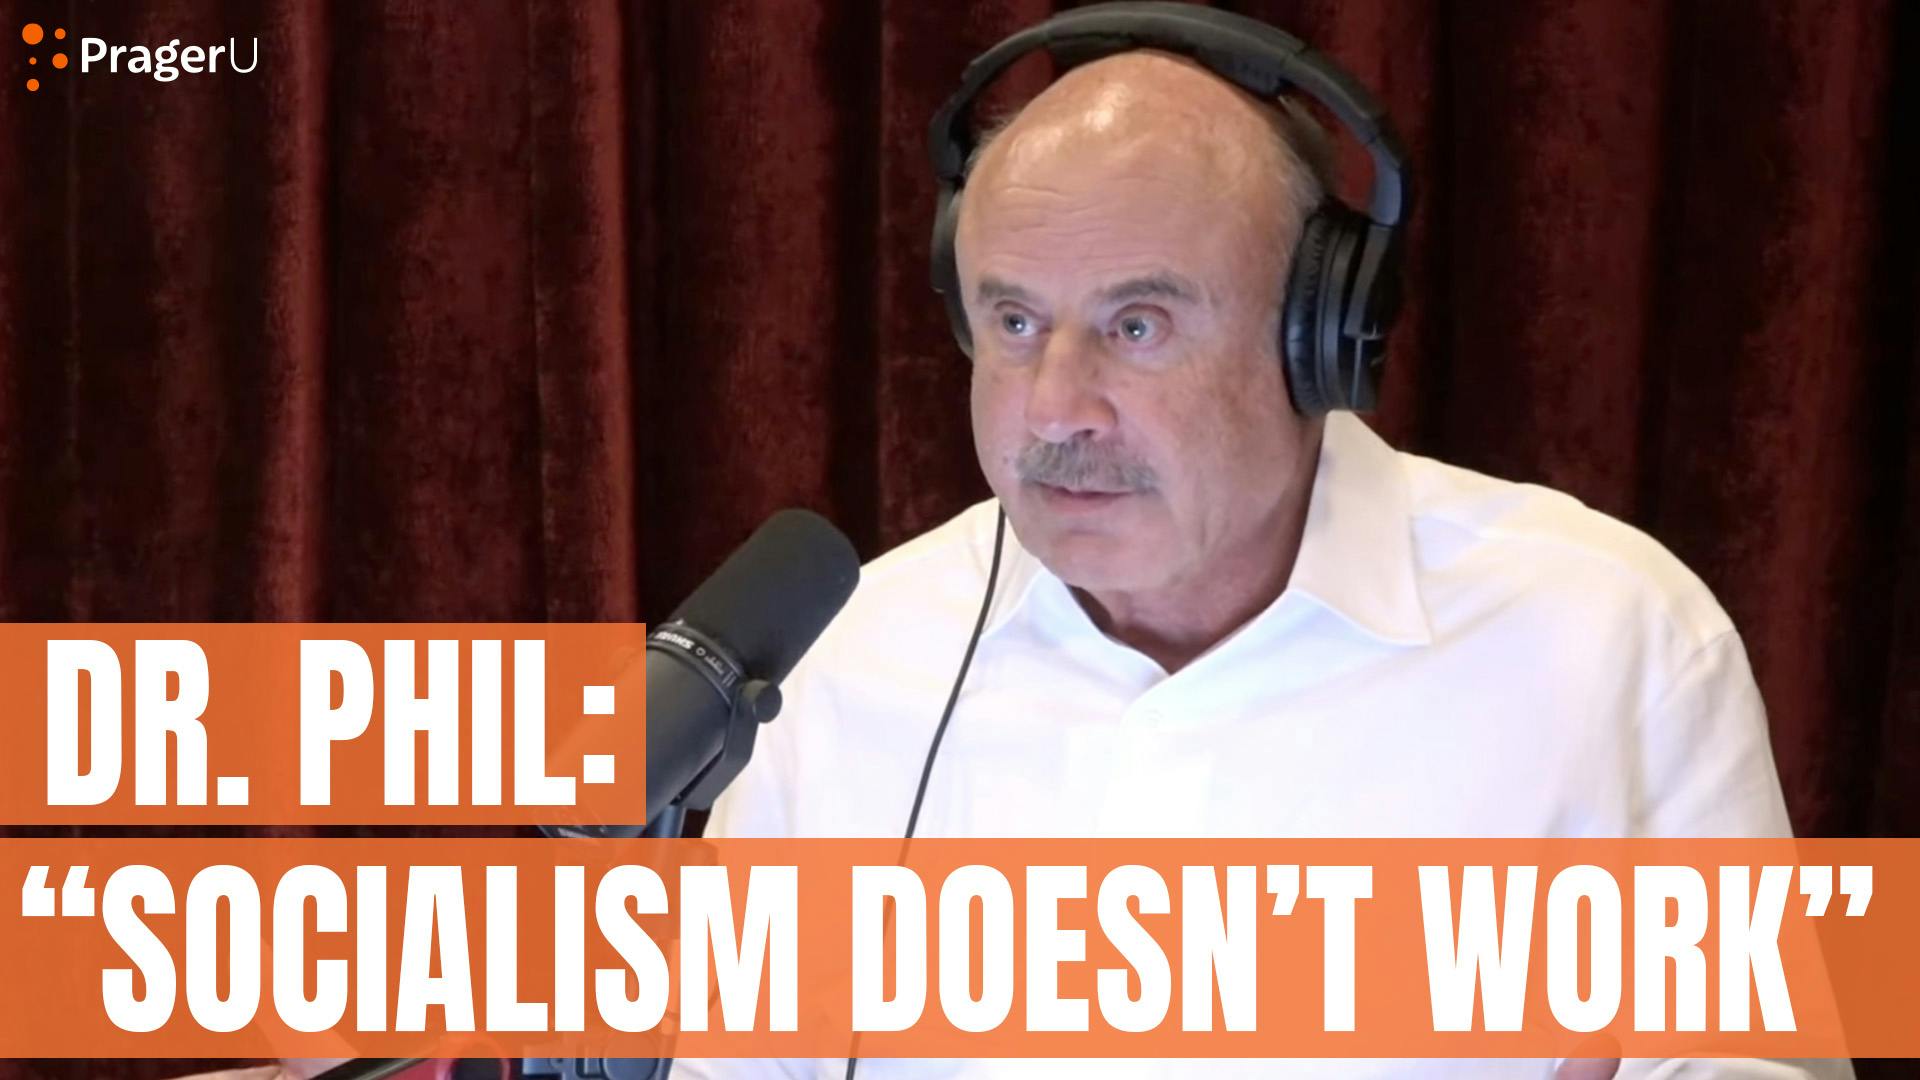 Dr. Phil: "Socialism Doesn't Work"